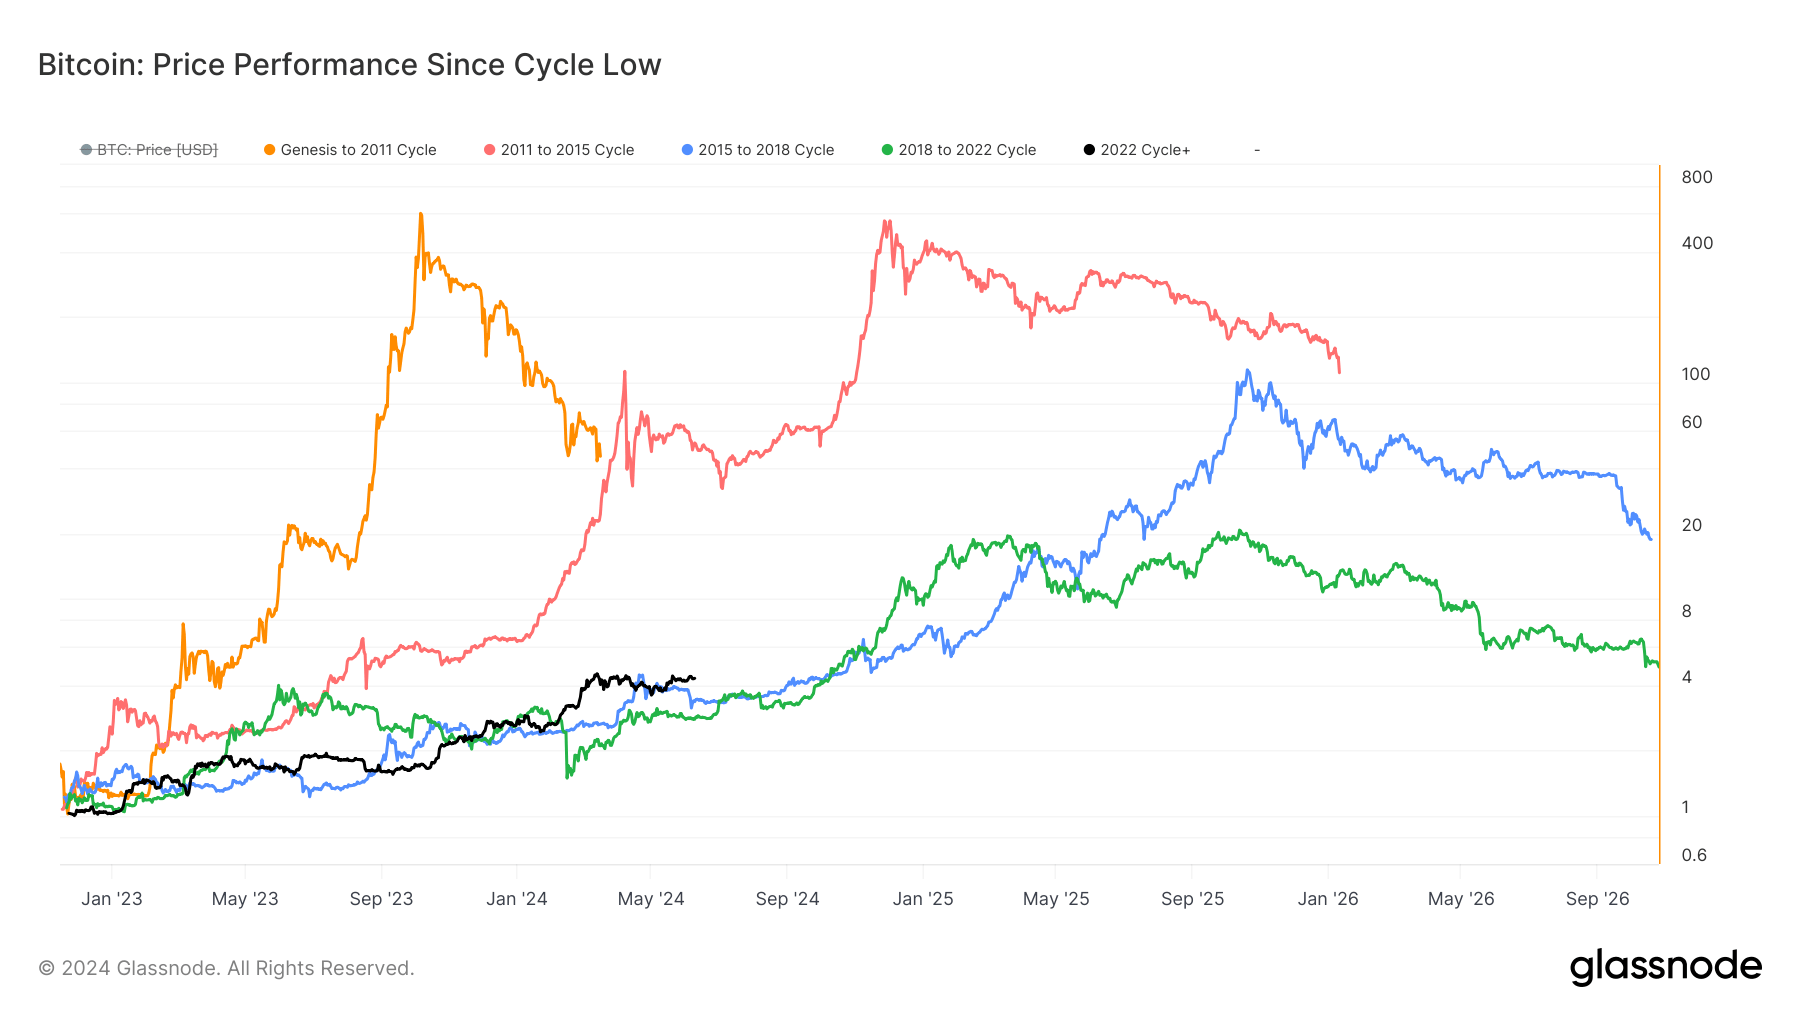 Bitcoin’s Post-Halving Performance: Only the second epoch with price rise at this cycle point